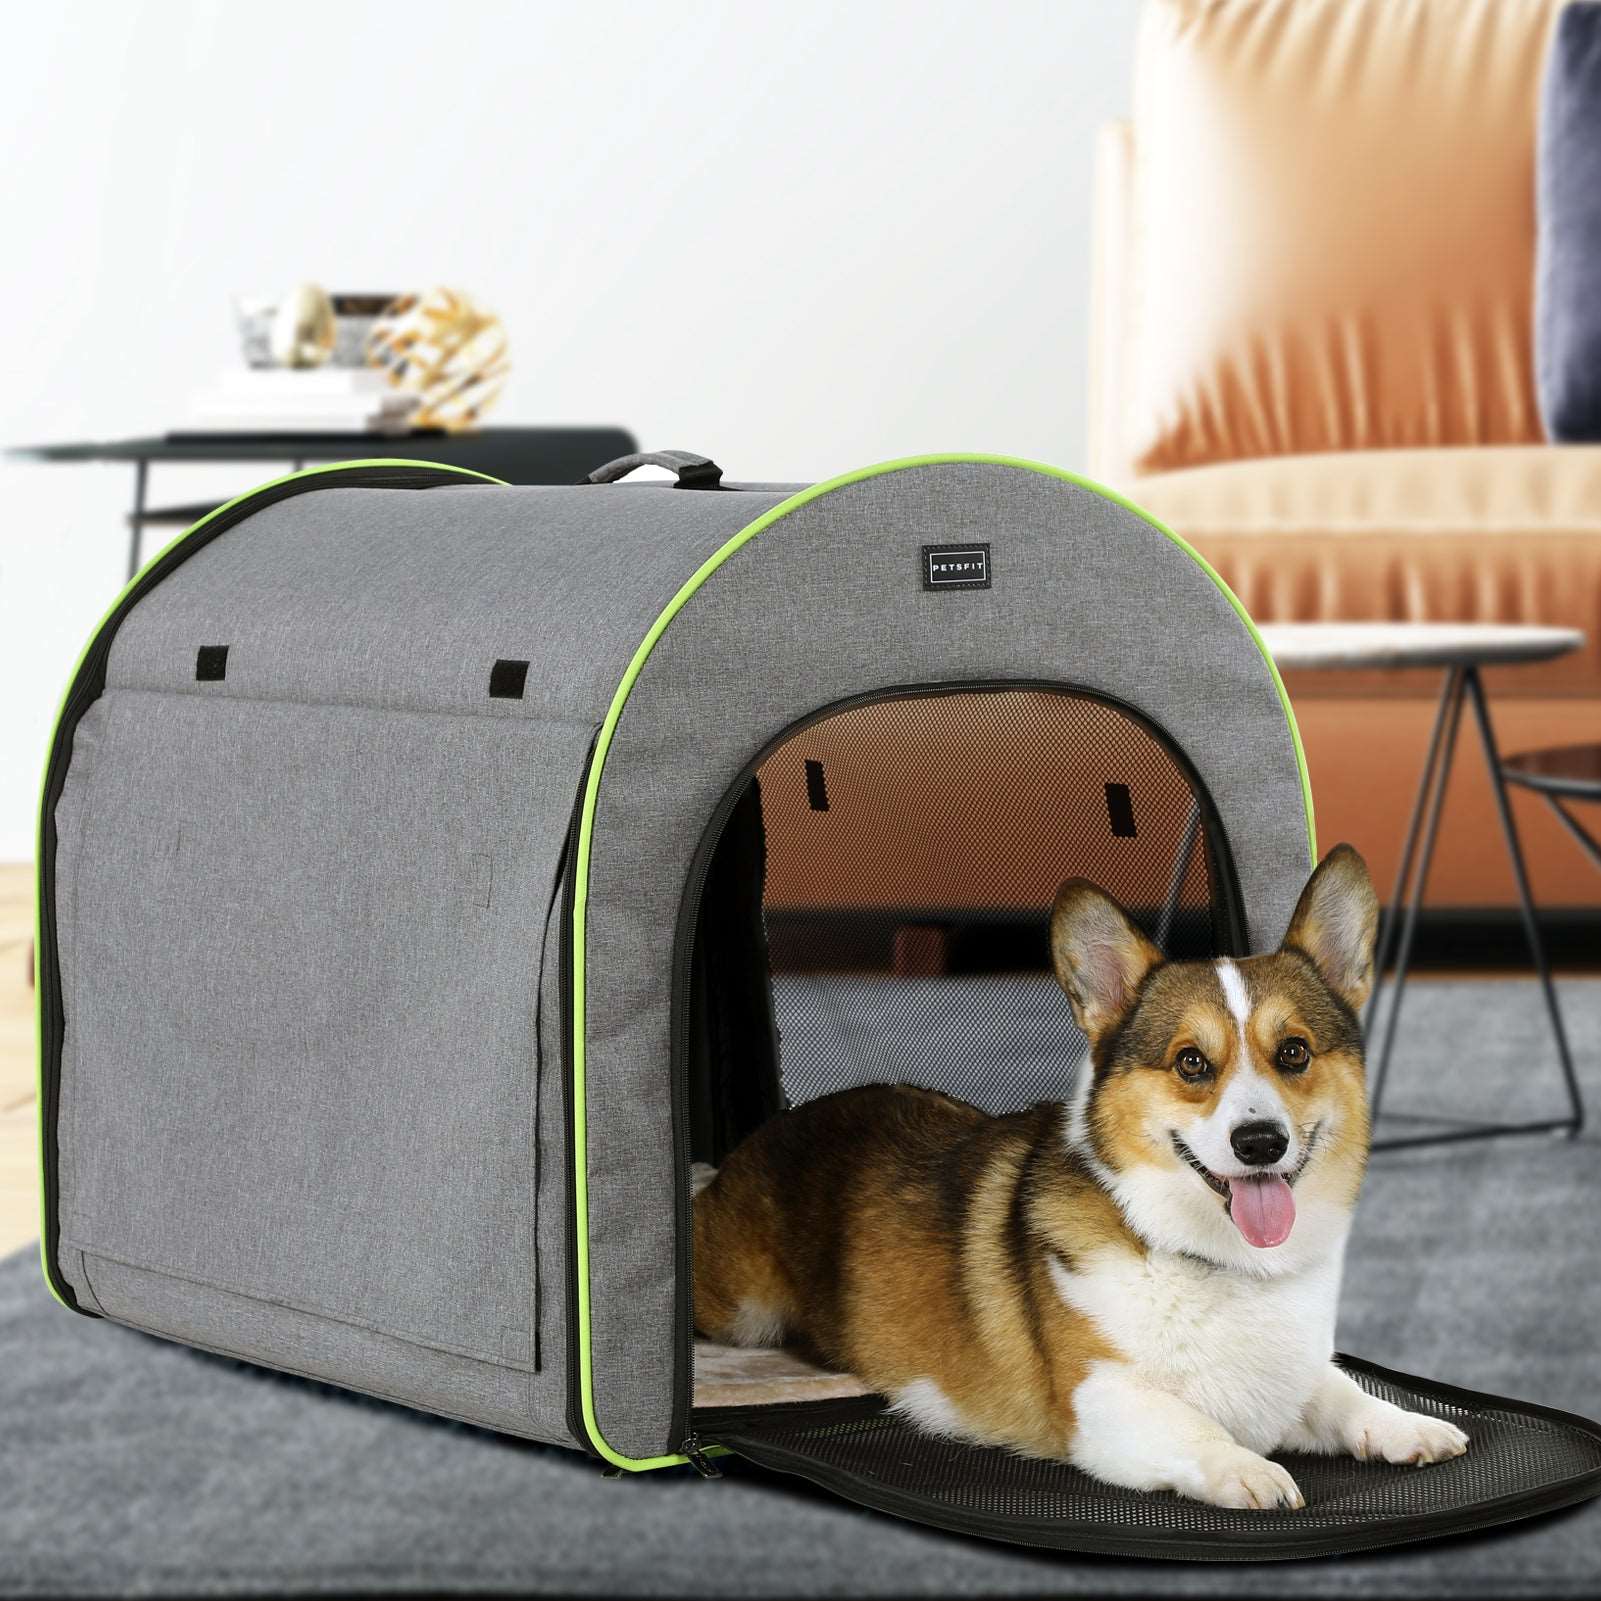 Petsfit-Portable-Soft-Collapsible-Dog-Crate-Travel-Soft-Kennel-06